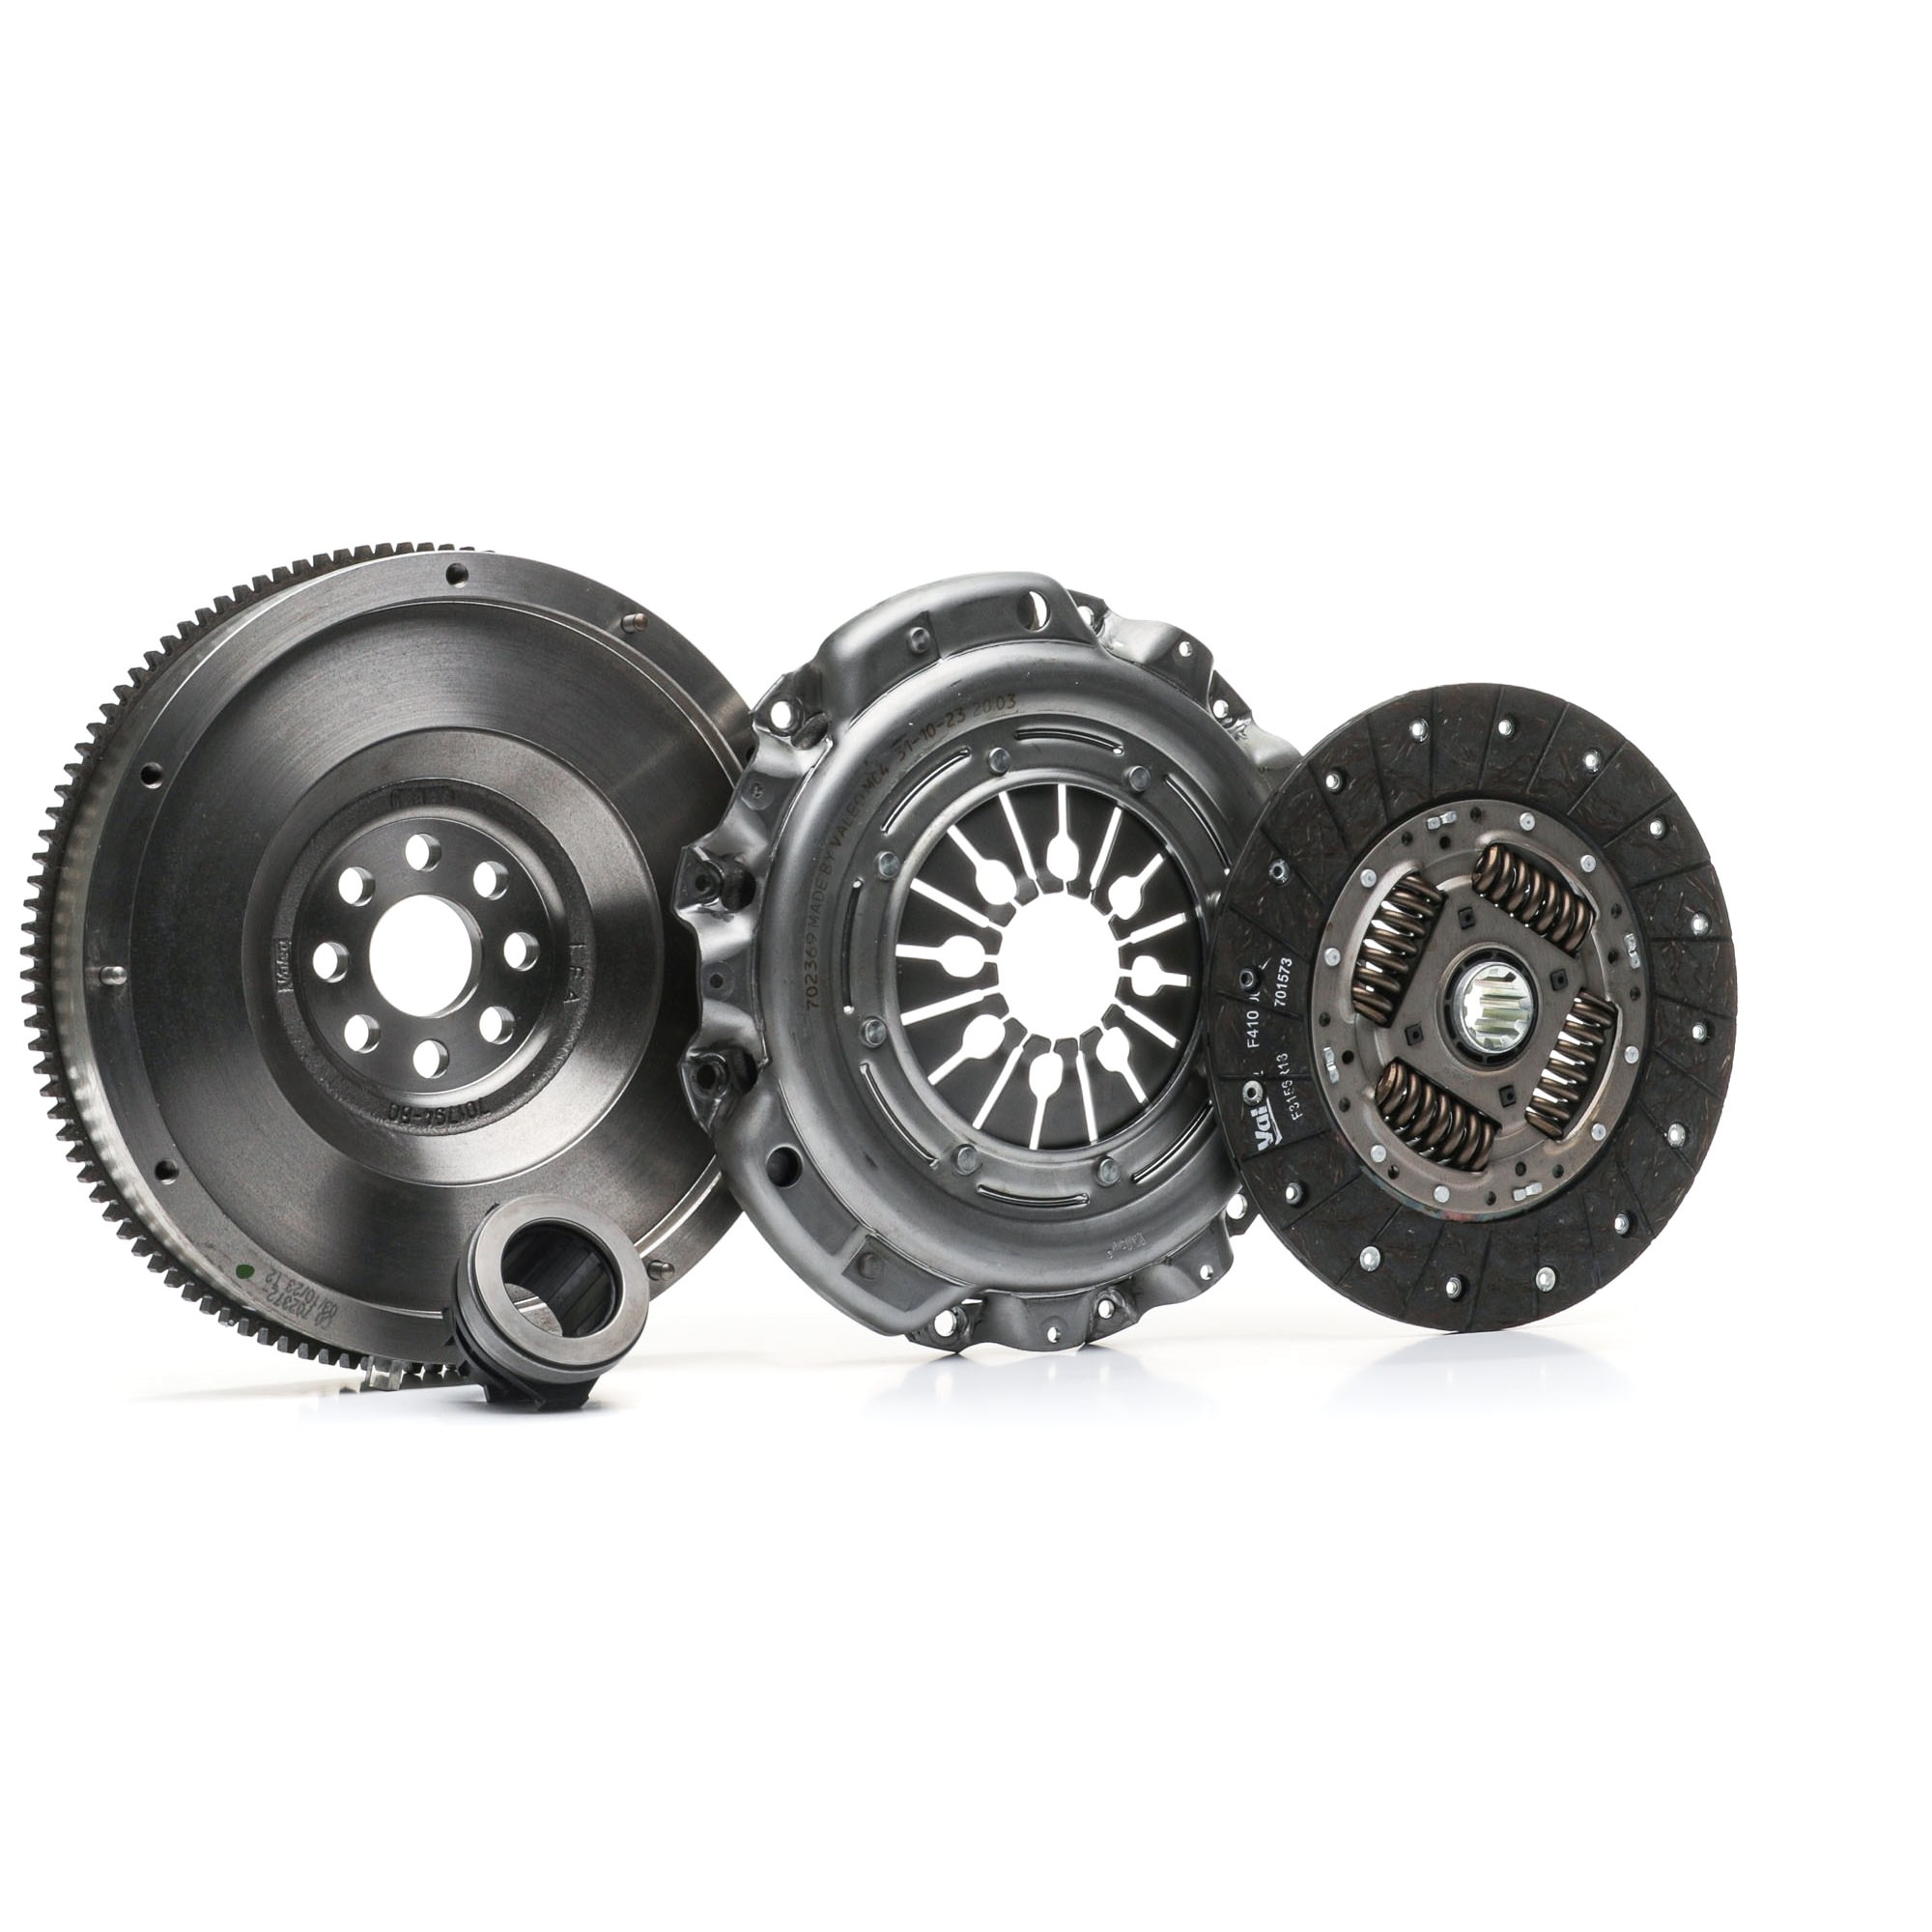 835038 VALEO Clutch set BMW with single-mass flywheel, with screw set, with clutch release bearing, Requires special tools for mounting, 240mm